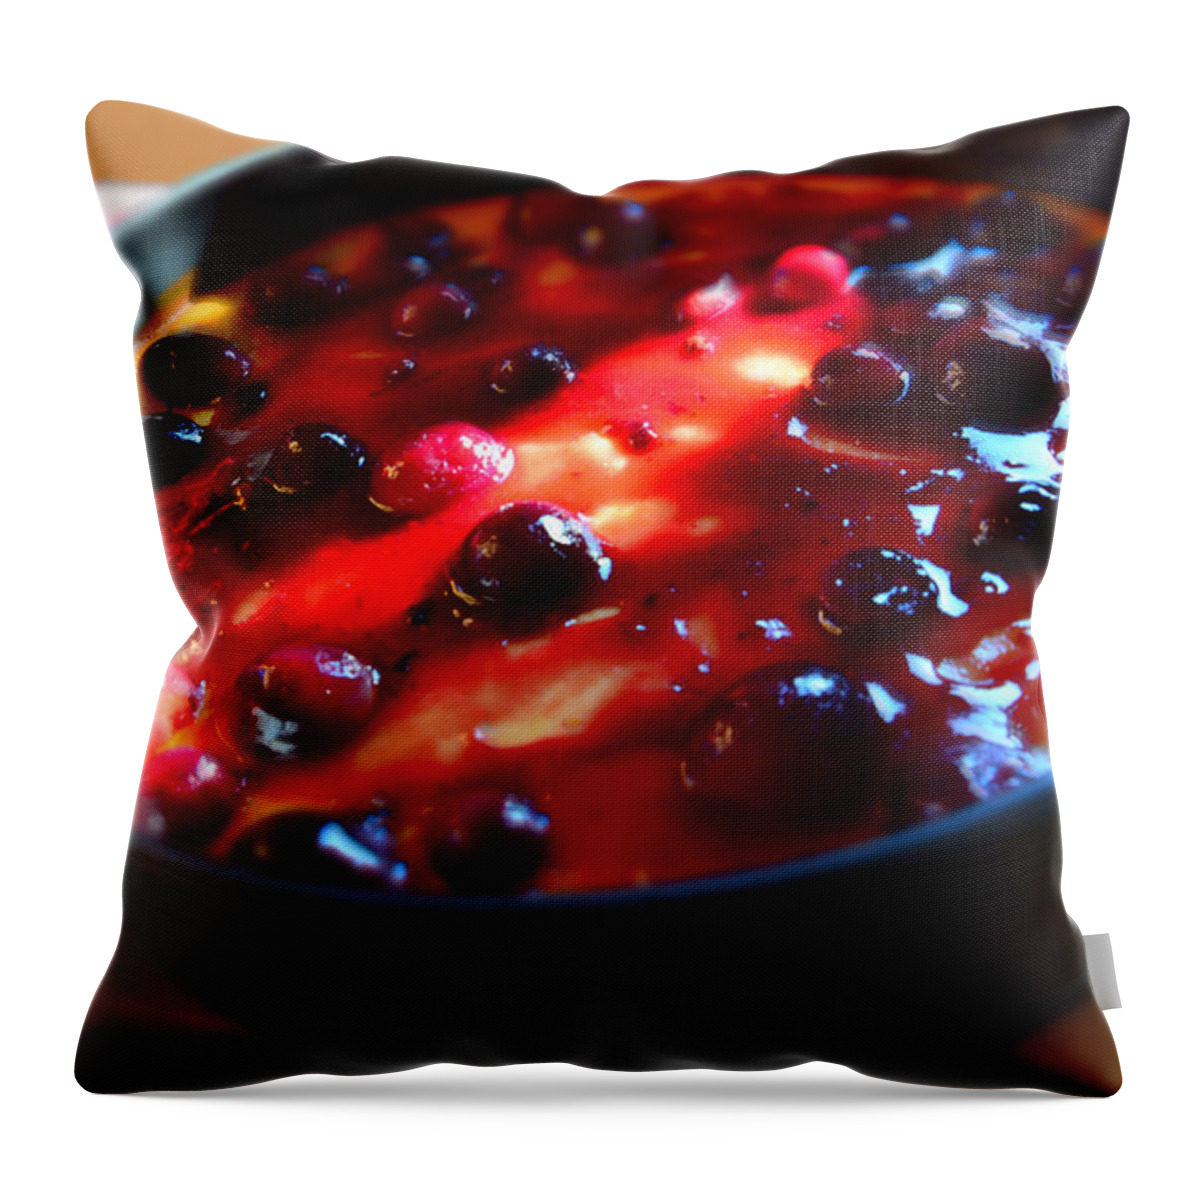 Pie Throw Pillow featuring the photograph Sweetest Cheese Pie by Ramona Matei